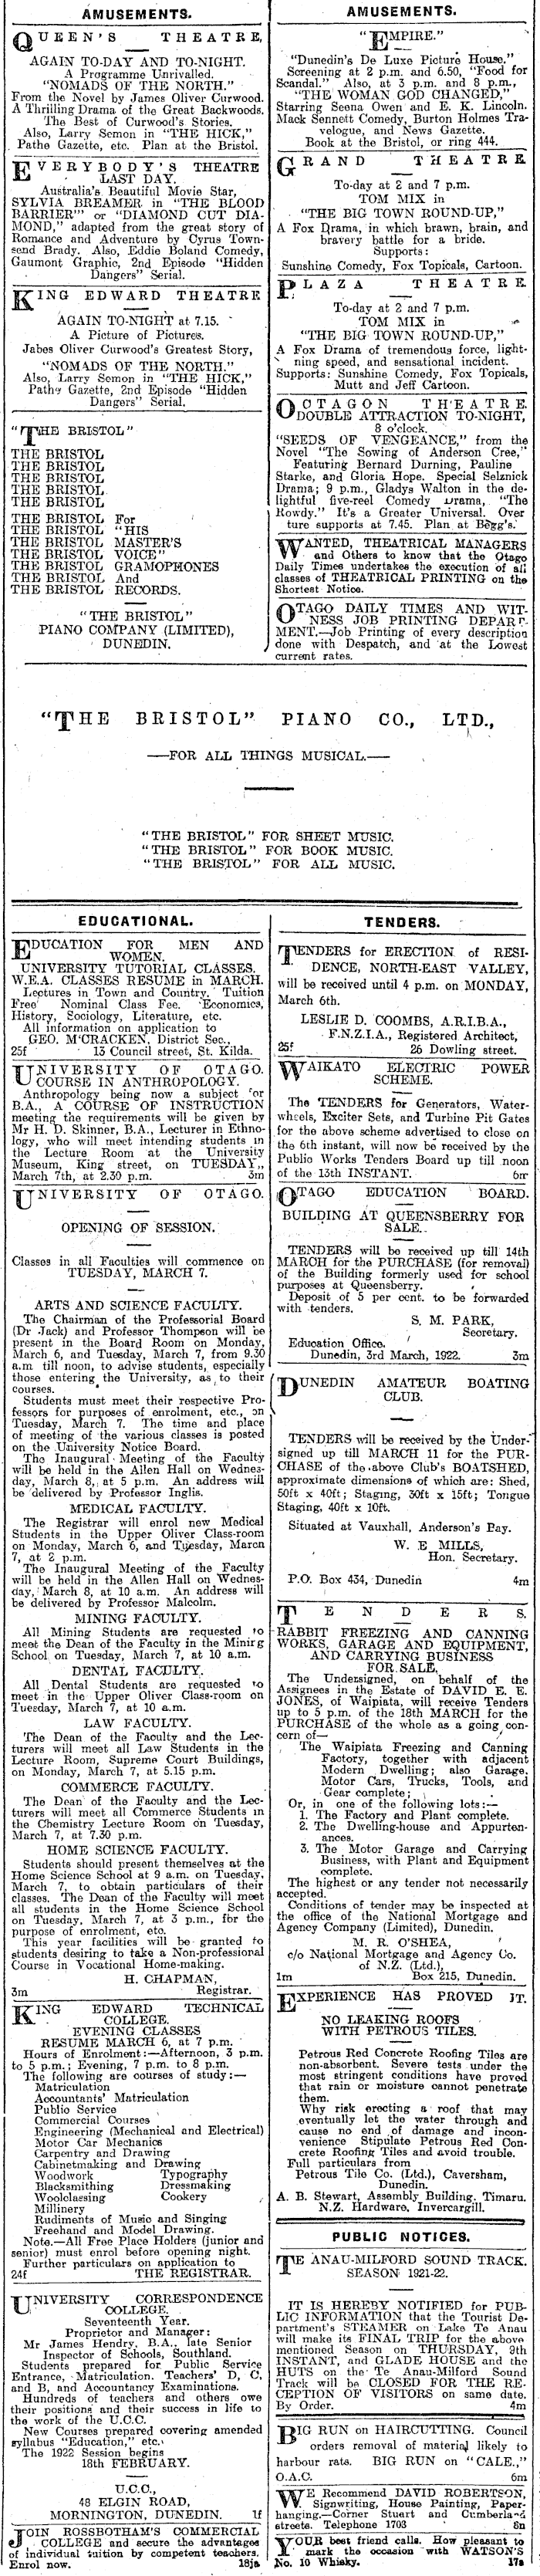 Papers Past | Newspapers | Otago Daily Times | 6 March 1922 | Page 1  Advertisements Column 5